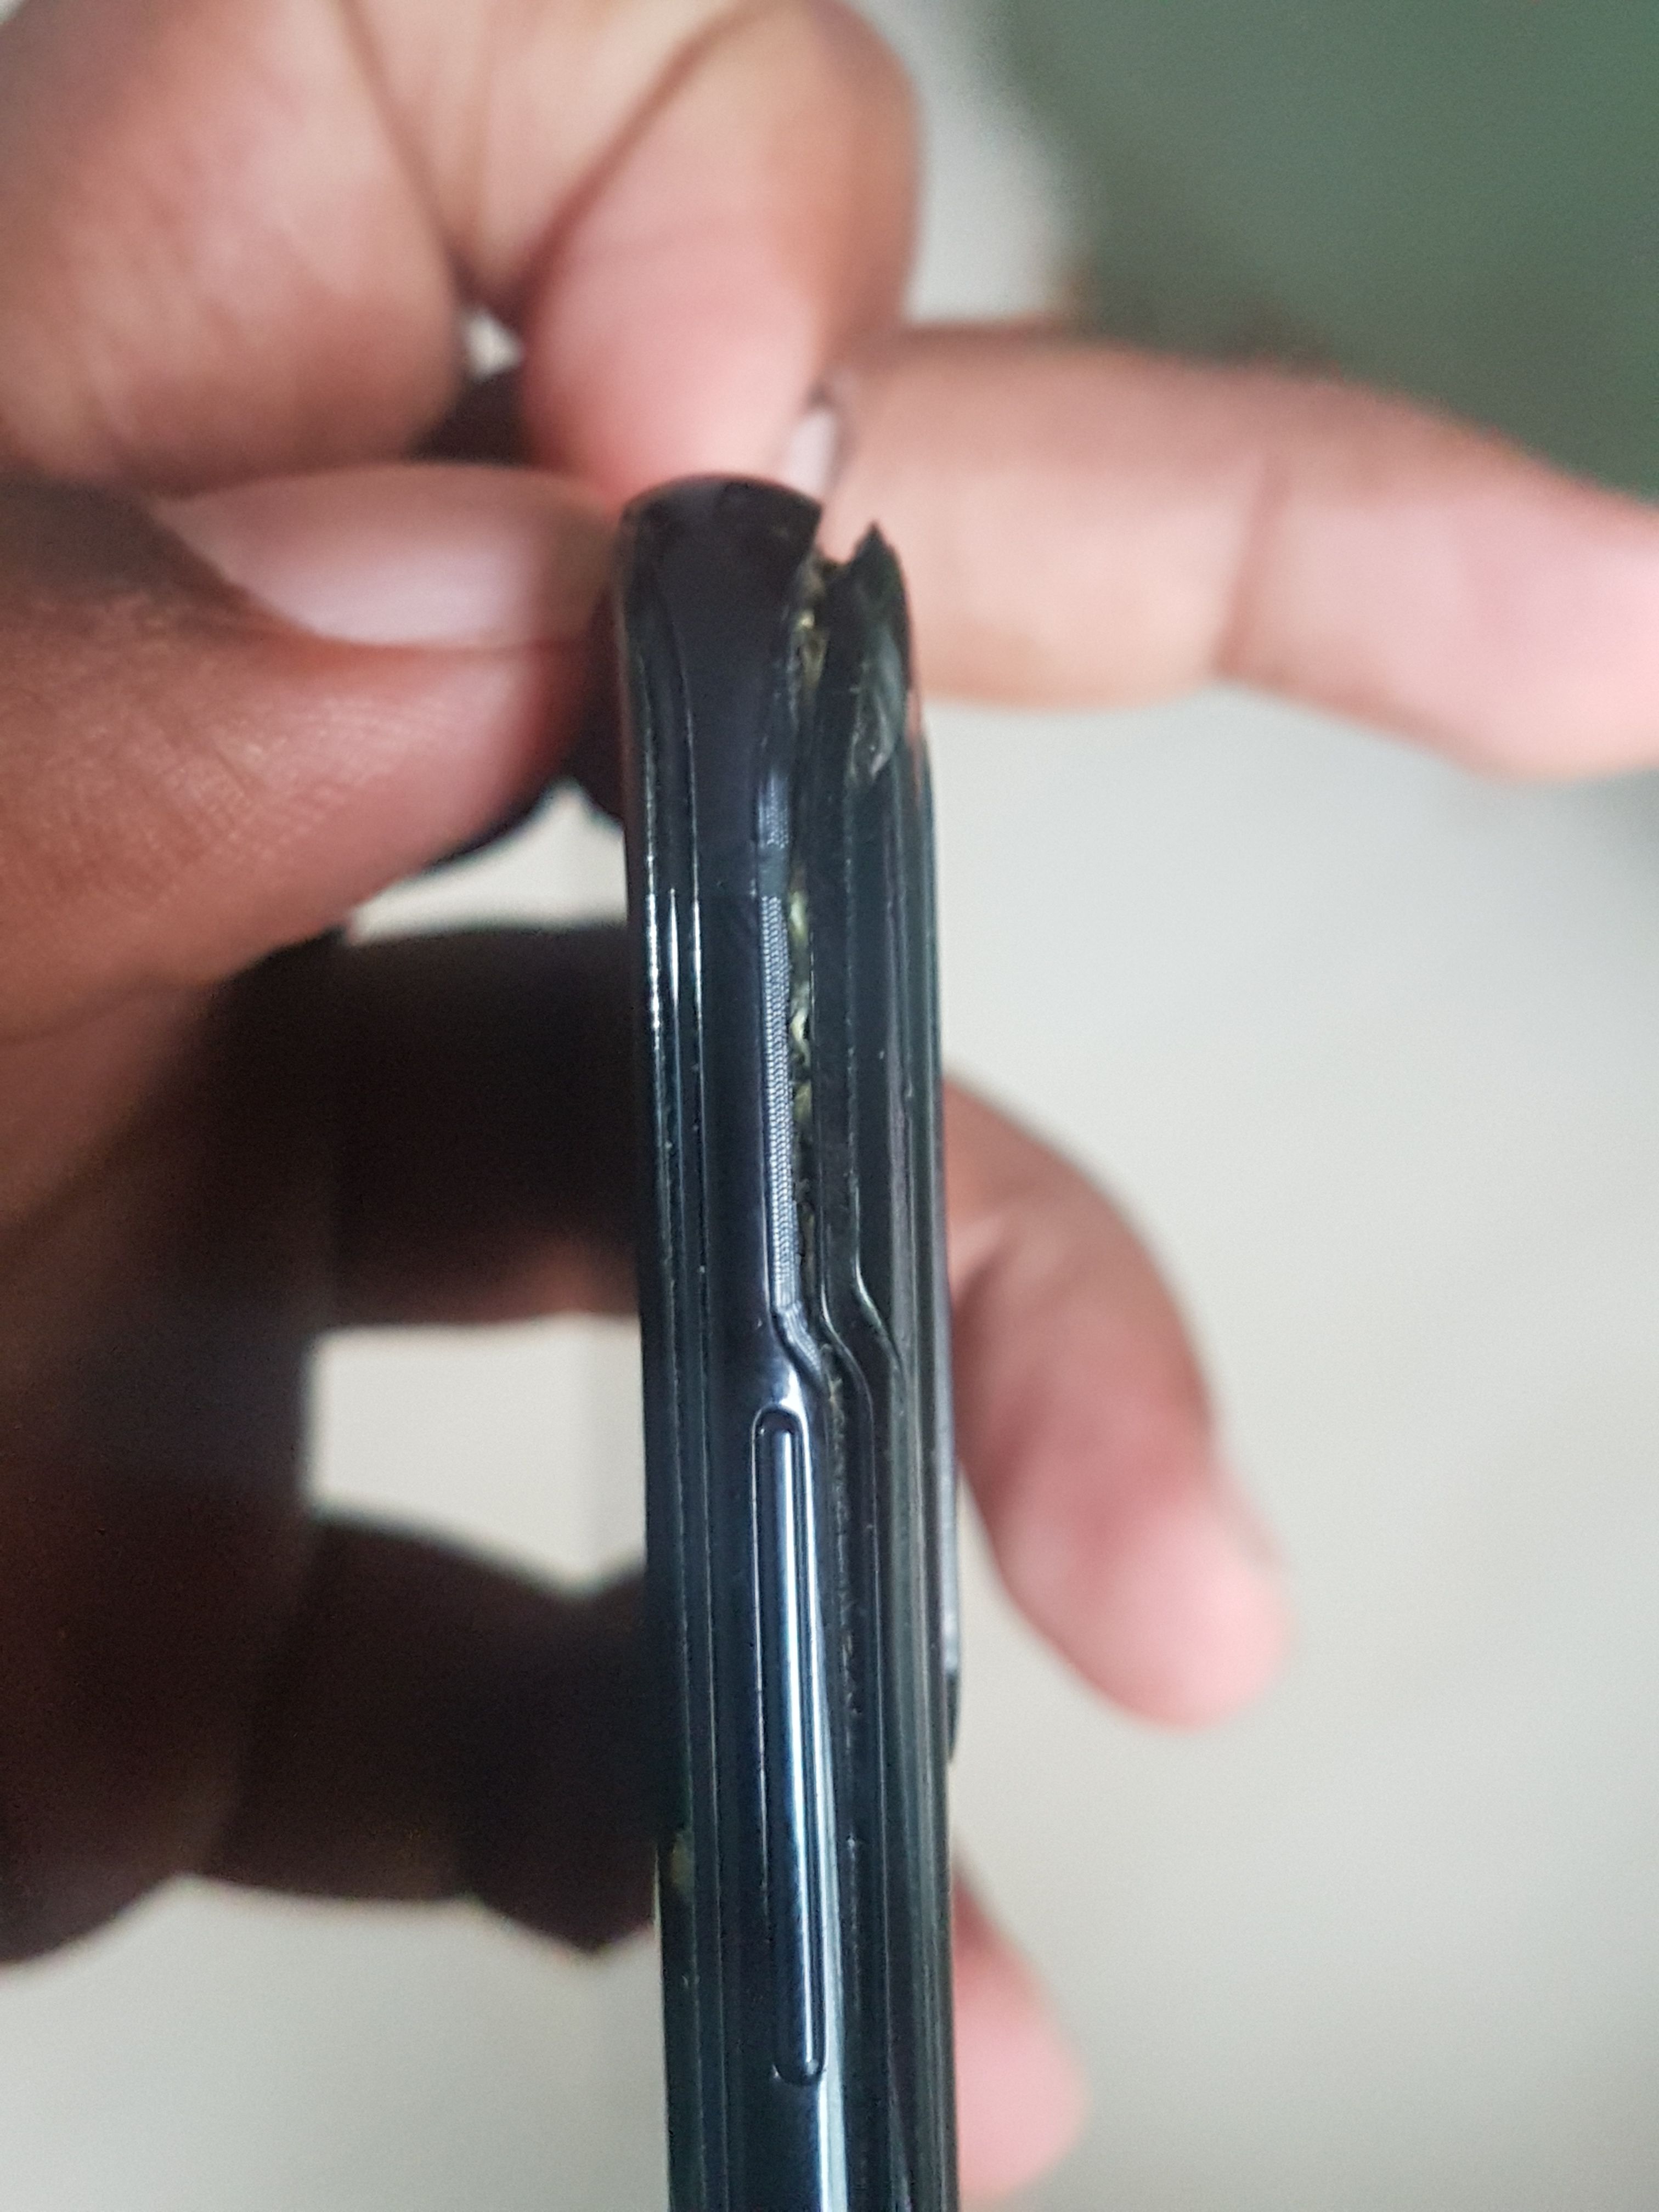 Quality issue of s20 plus,back case comes off - Samsung Members